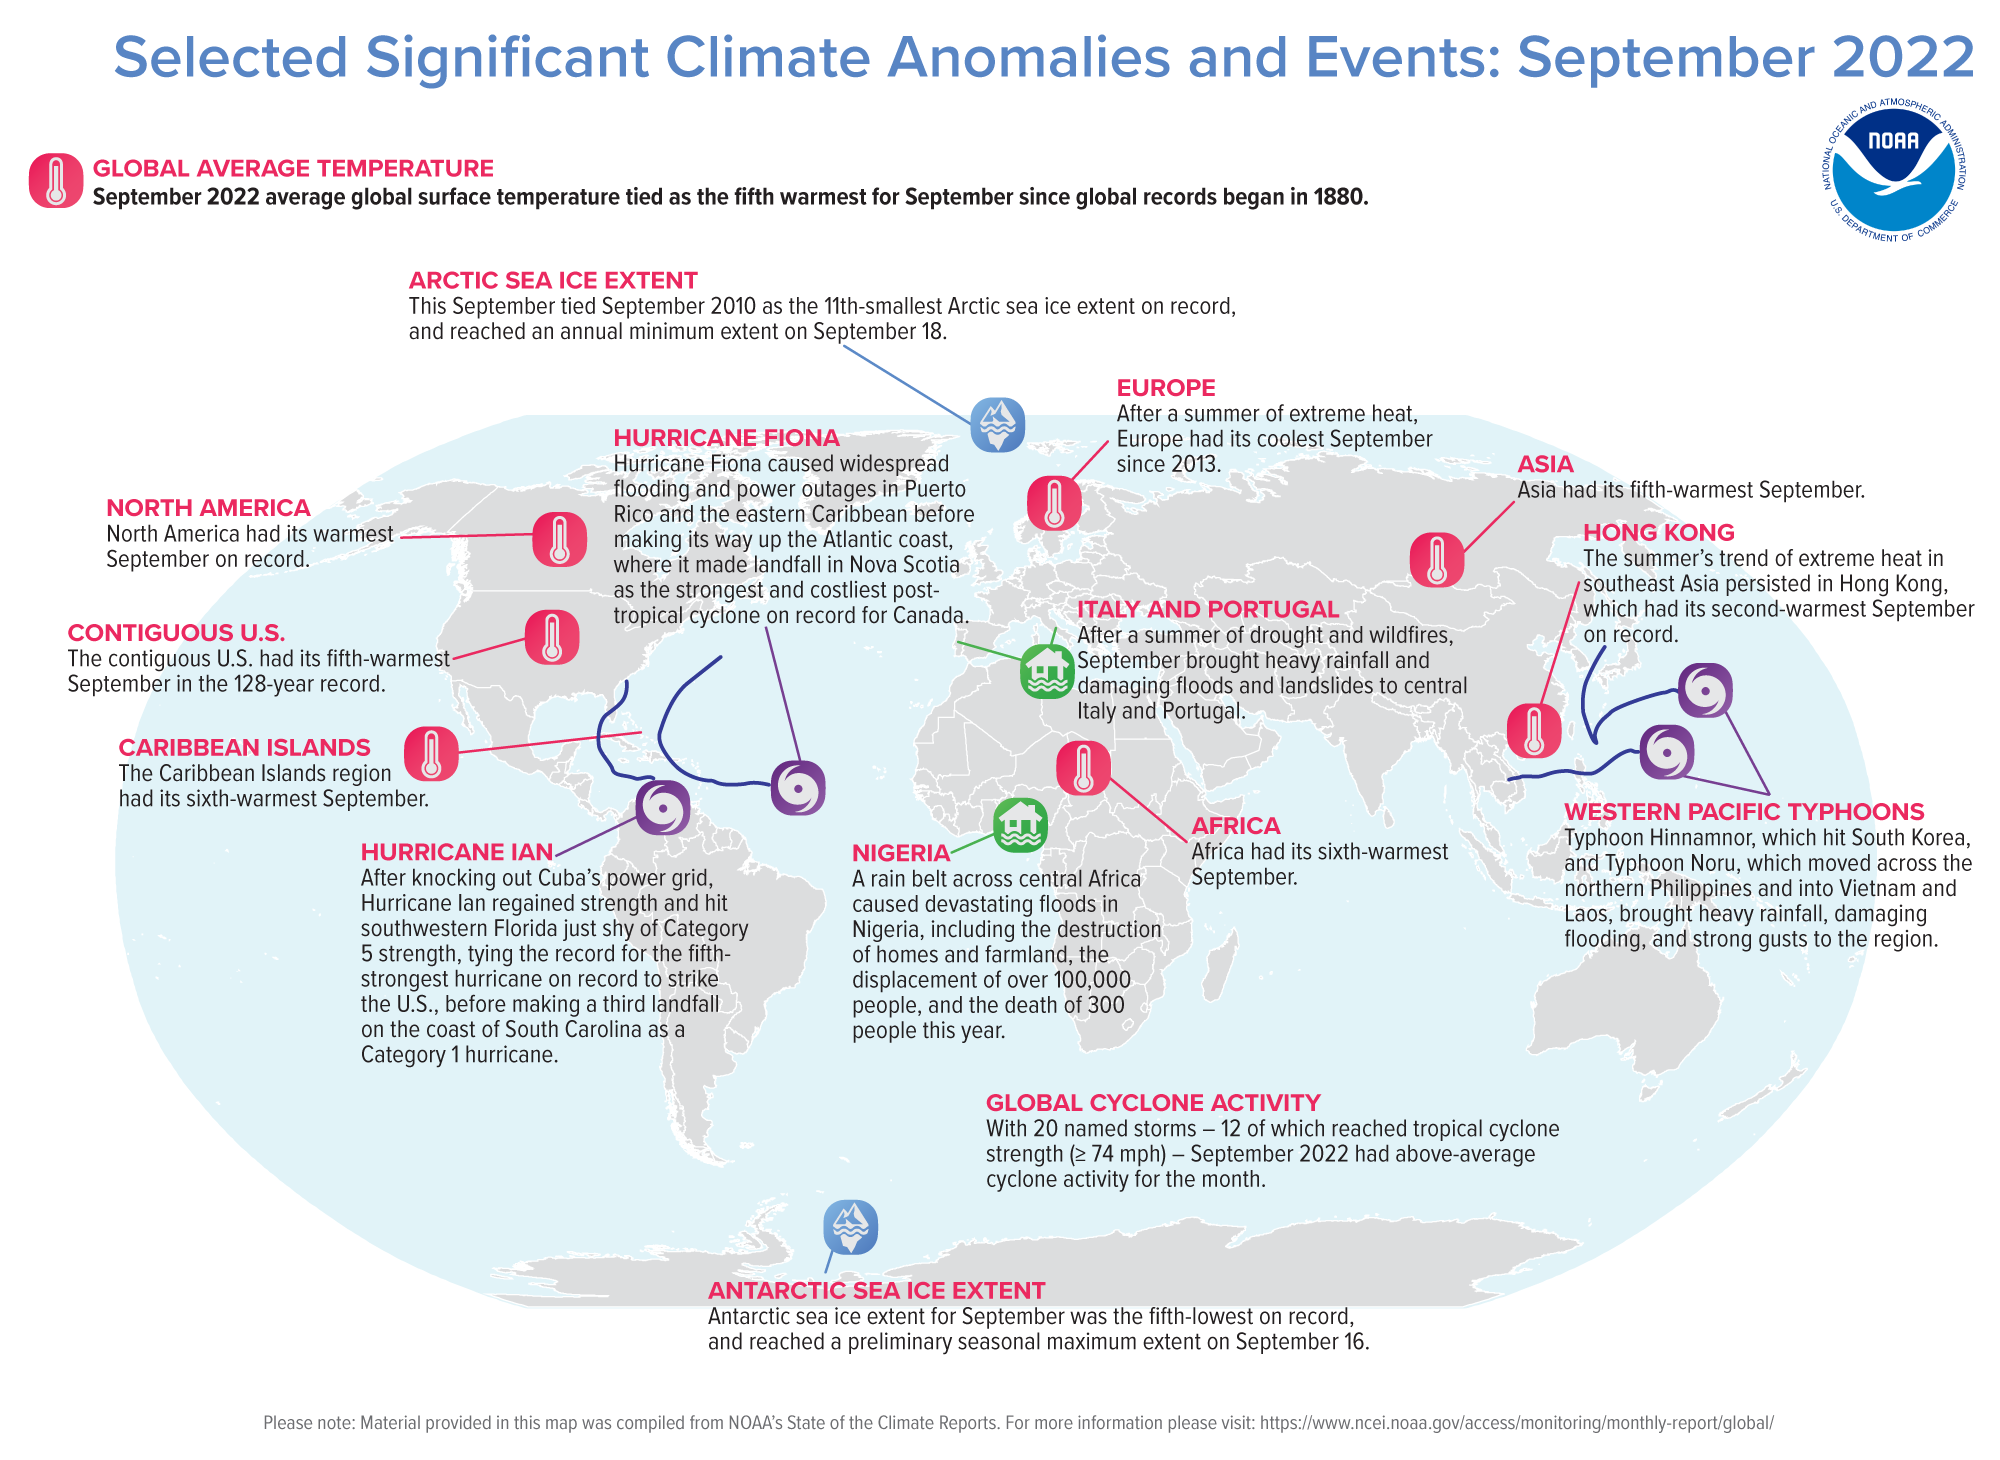 A map of the world plotted with some of the most significant climate events that occurred during September 2022.